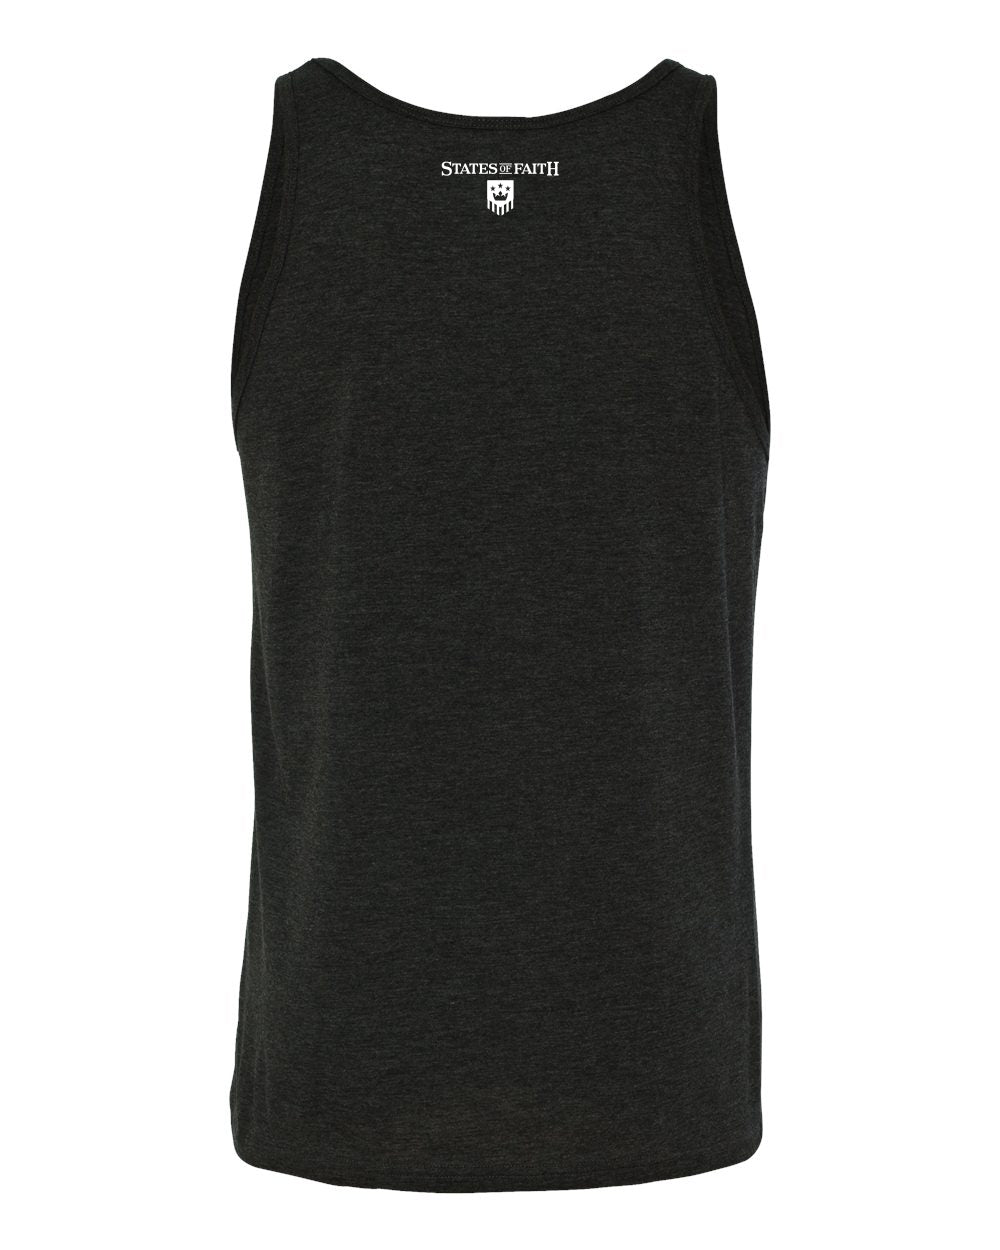 Alabama State Catholic Rosary custom tank tops for women, canvas bella, mens tank tops, muscle tee, bro tank, Gift, State Pride-back-heathered charcoal gray